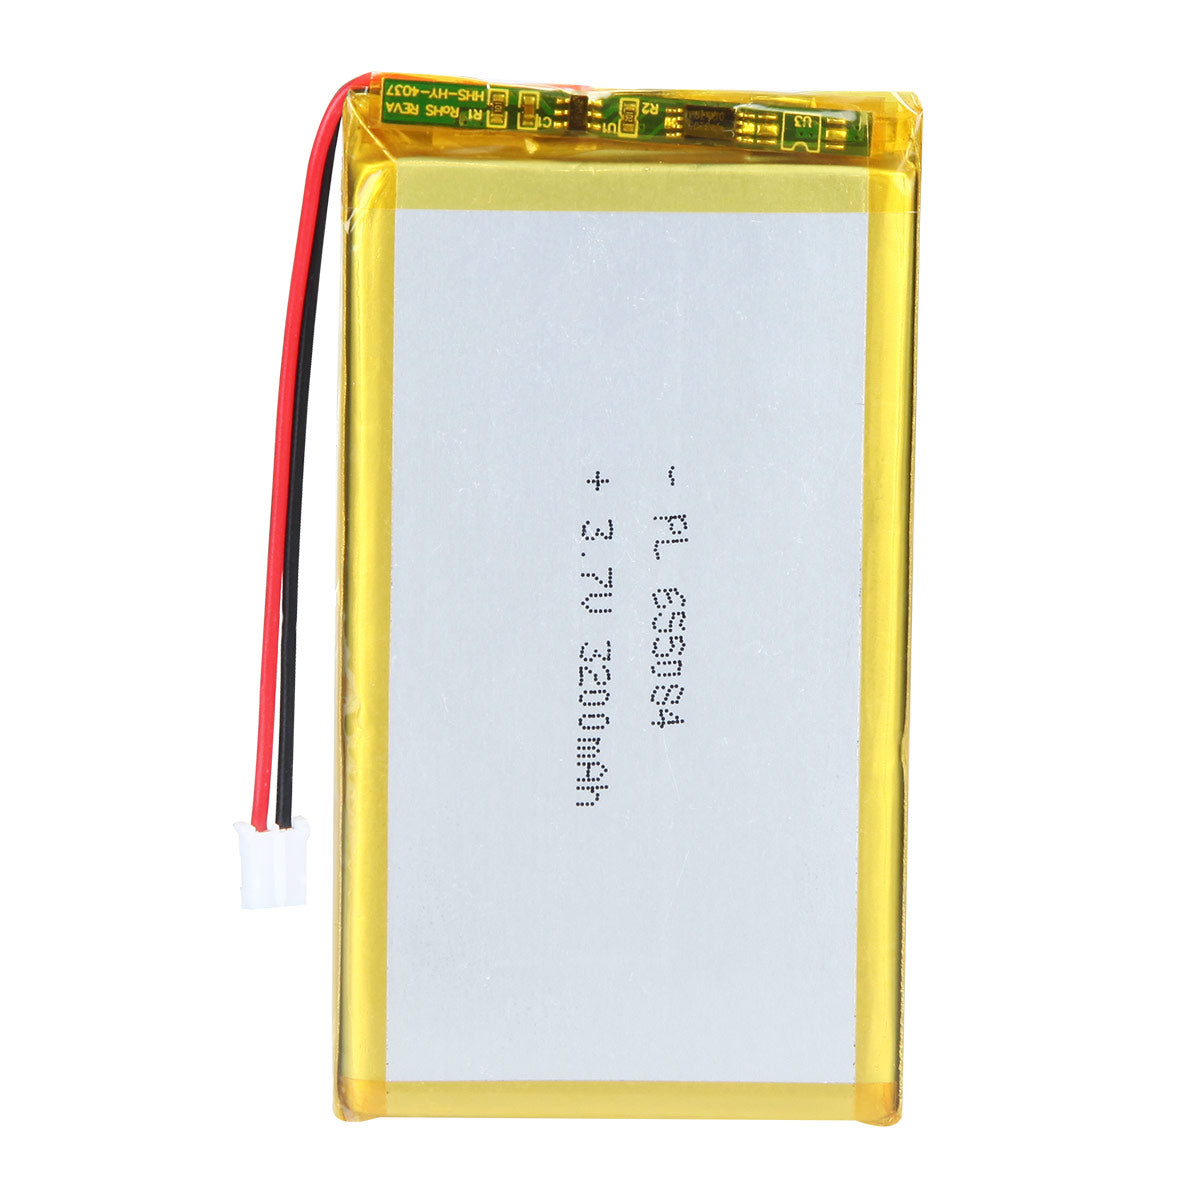 YDL 3.7V 3200mAh 655084 Rechargeable Lithium Polymer Battery